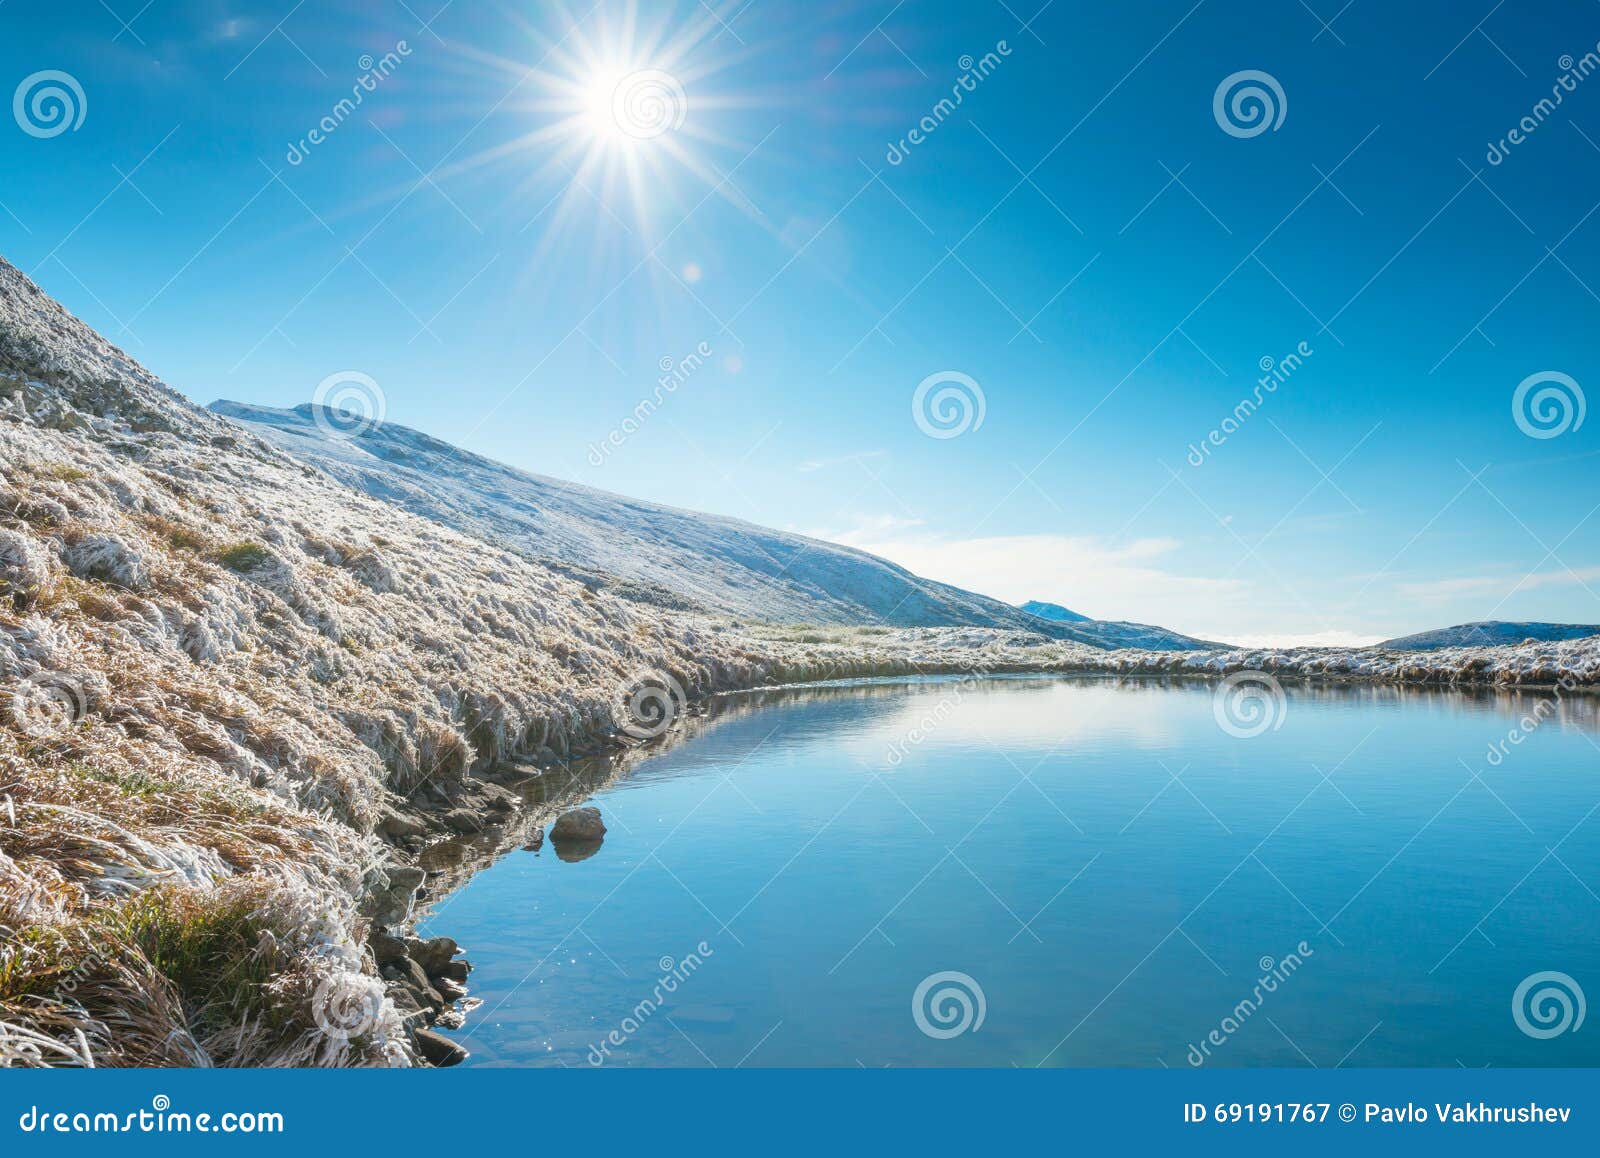 Beautiful Blue Lake in the Mountains Stock Image - Image of morning ...